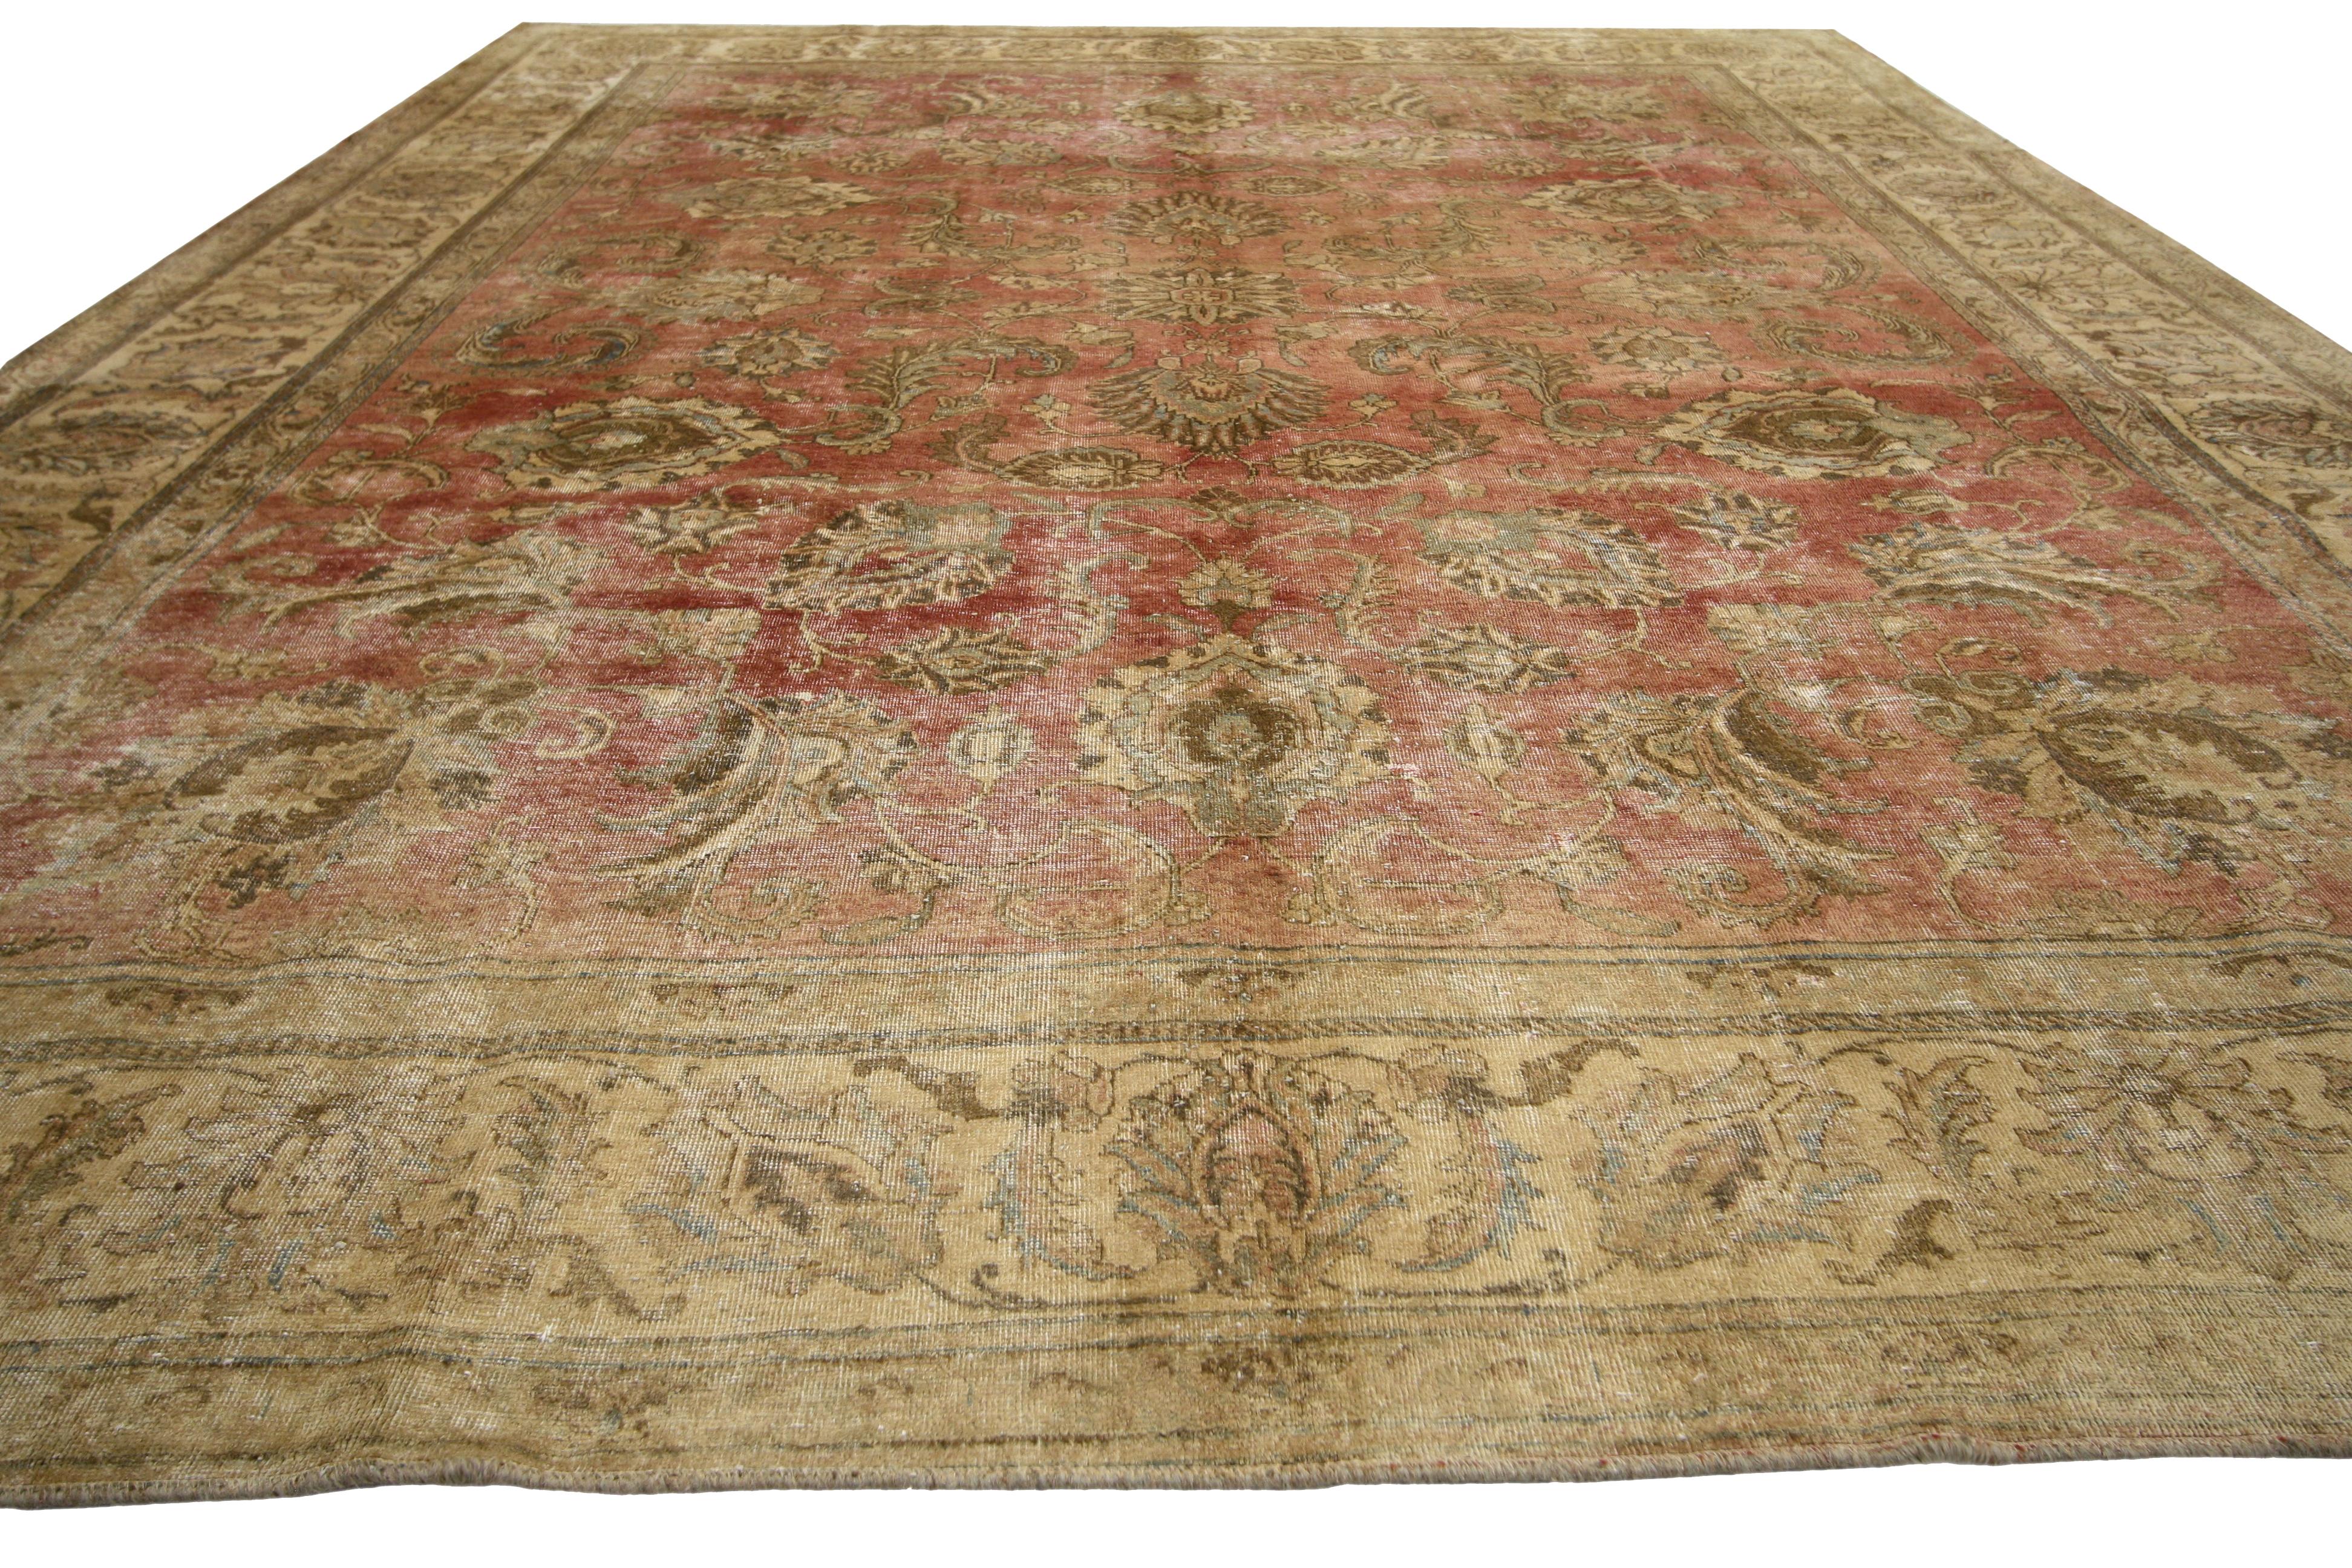 Hand-Knotted Distressed Vintage Tabriz Persian Rug with Rustic Style